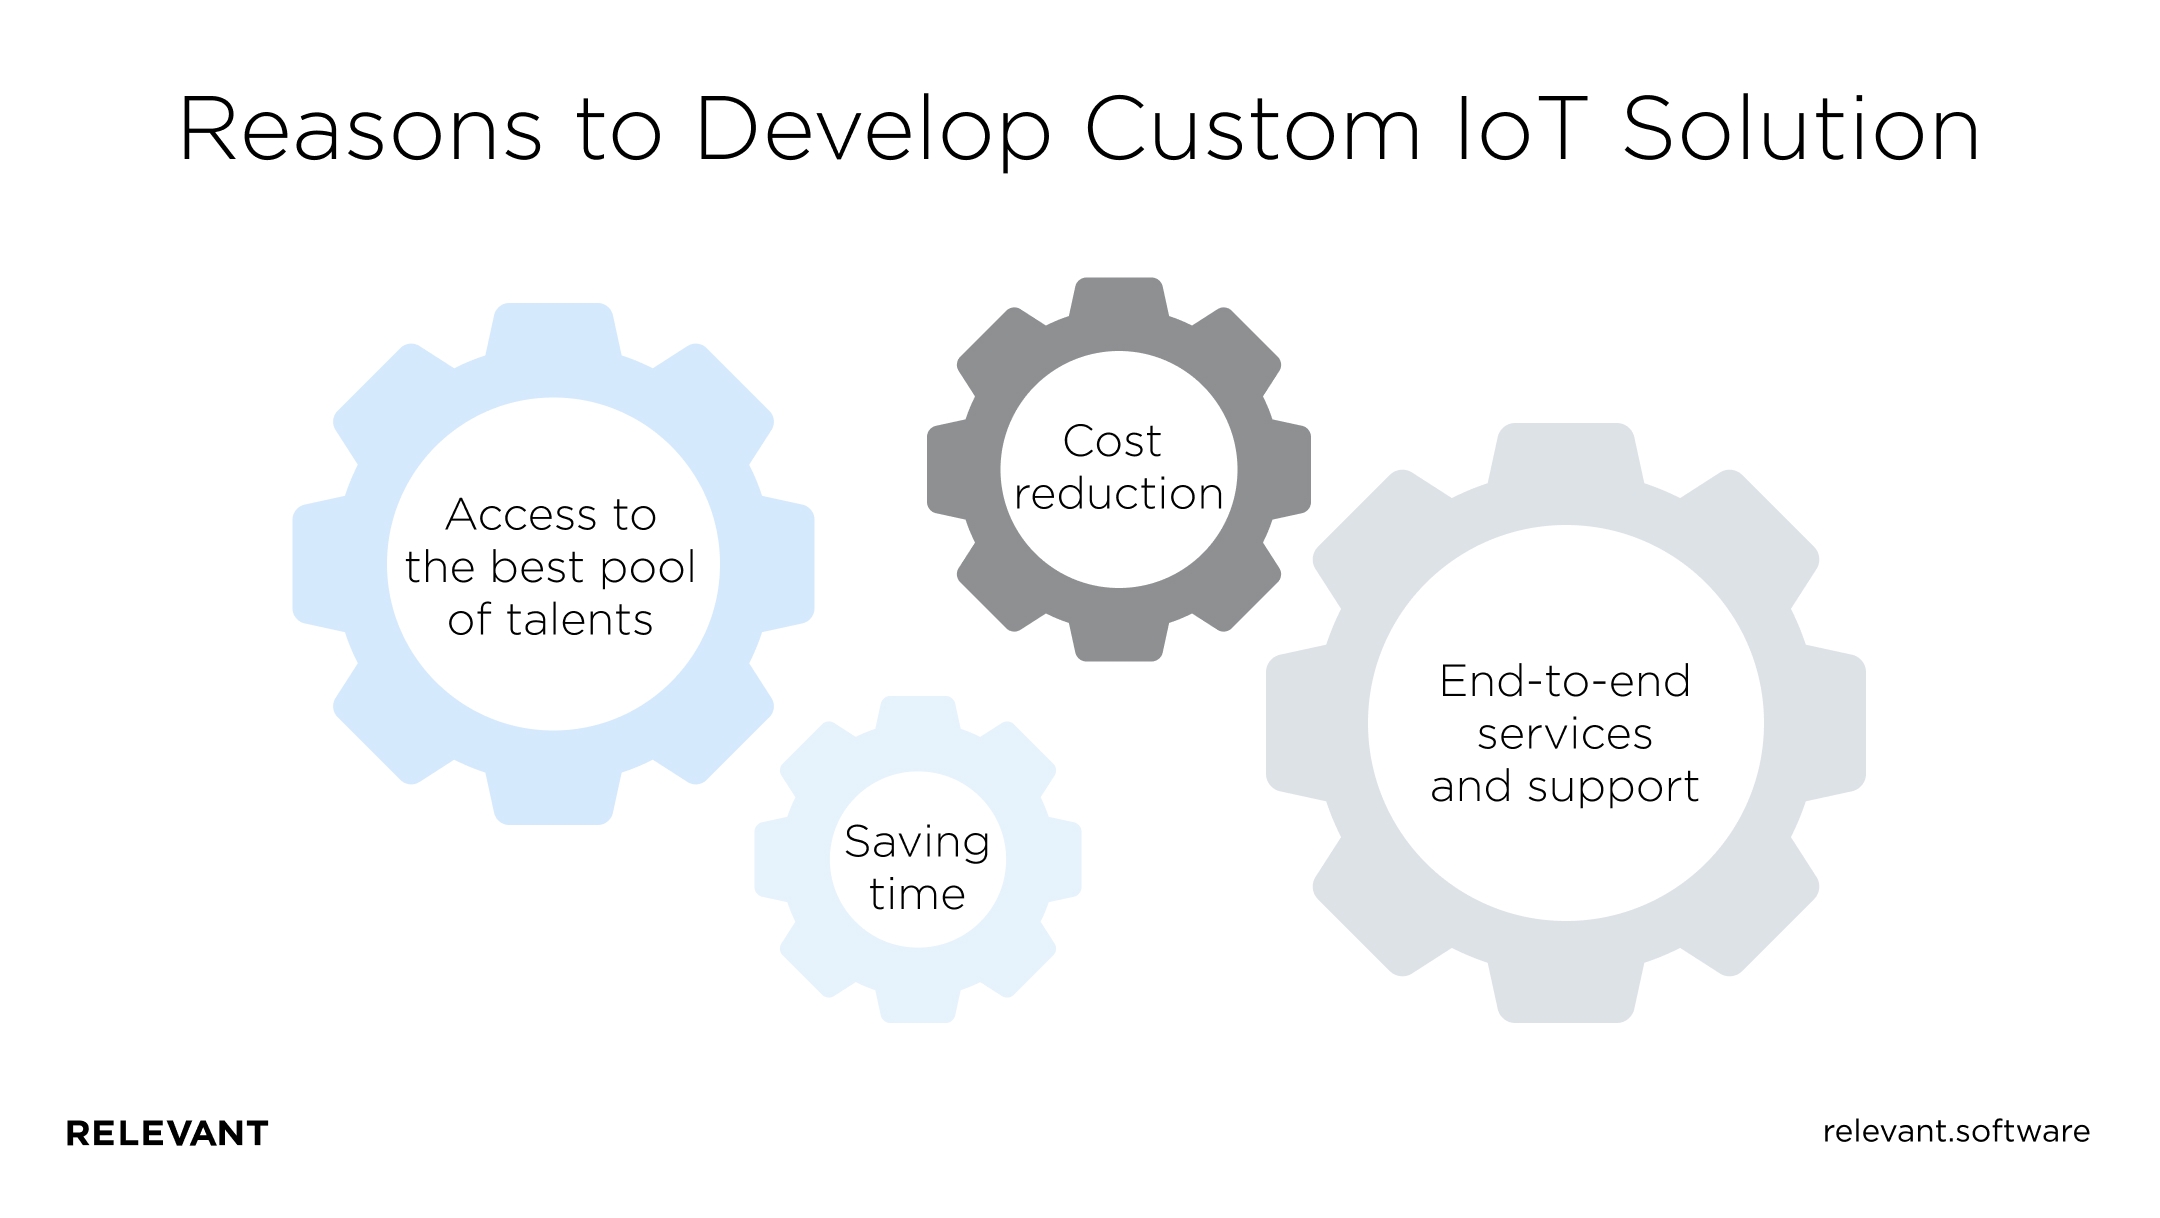 Reasons to develop Custom IoT Solution